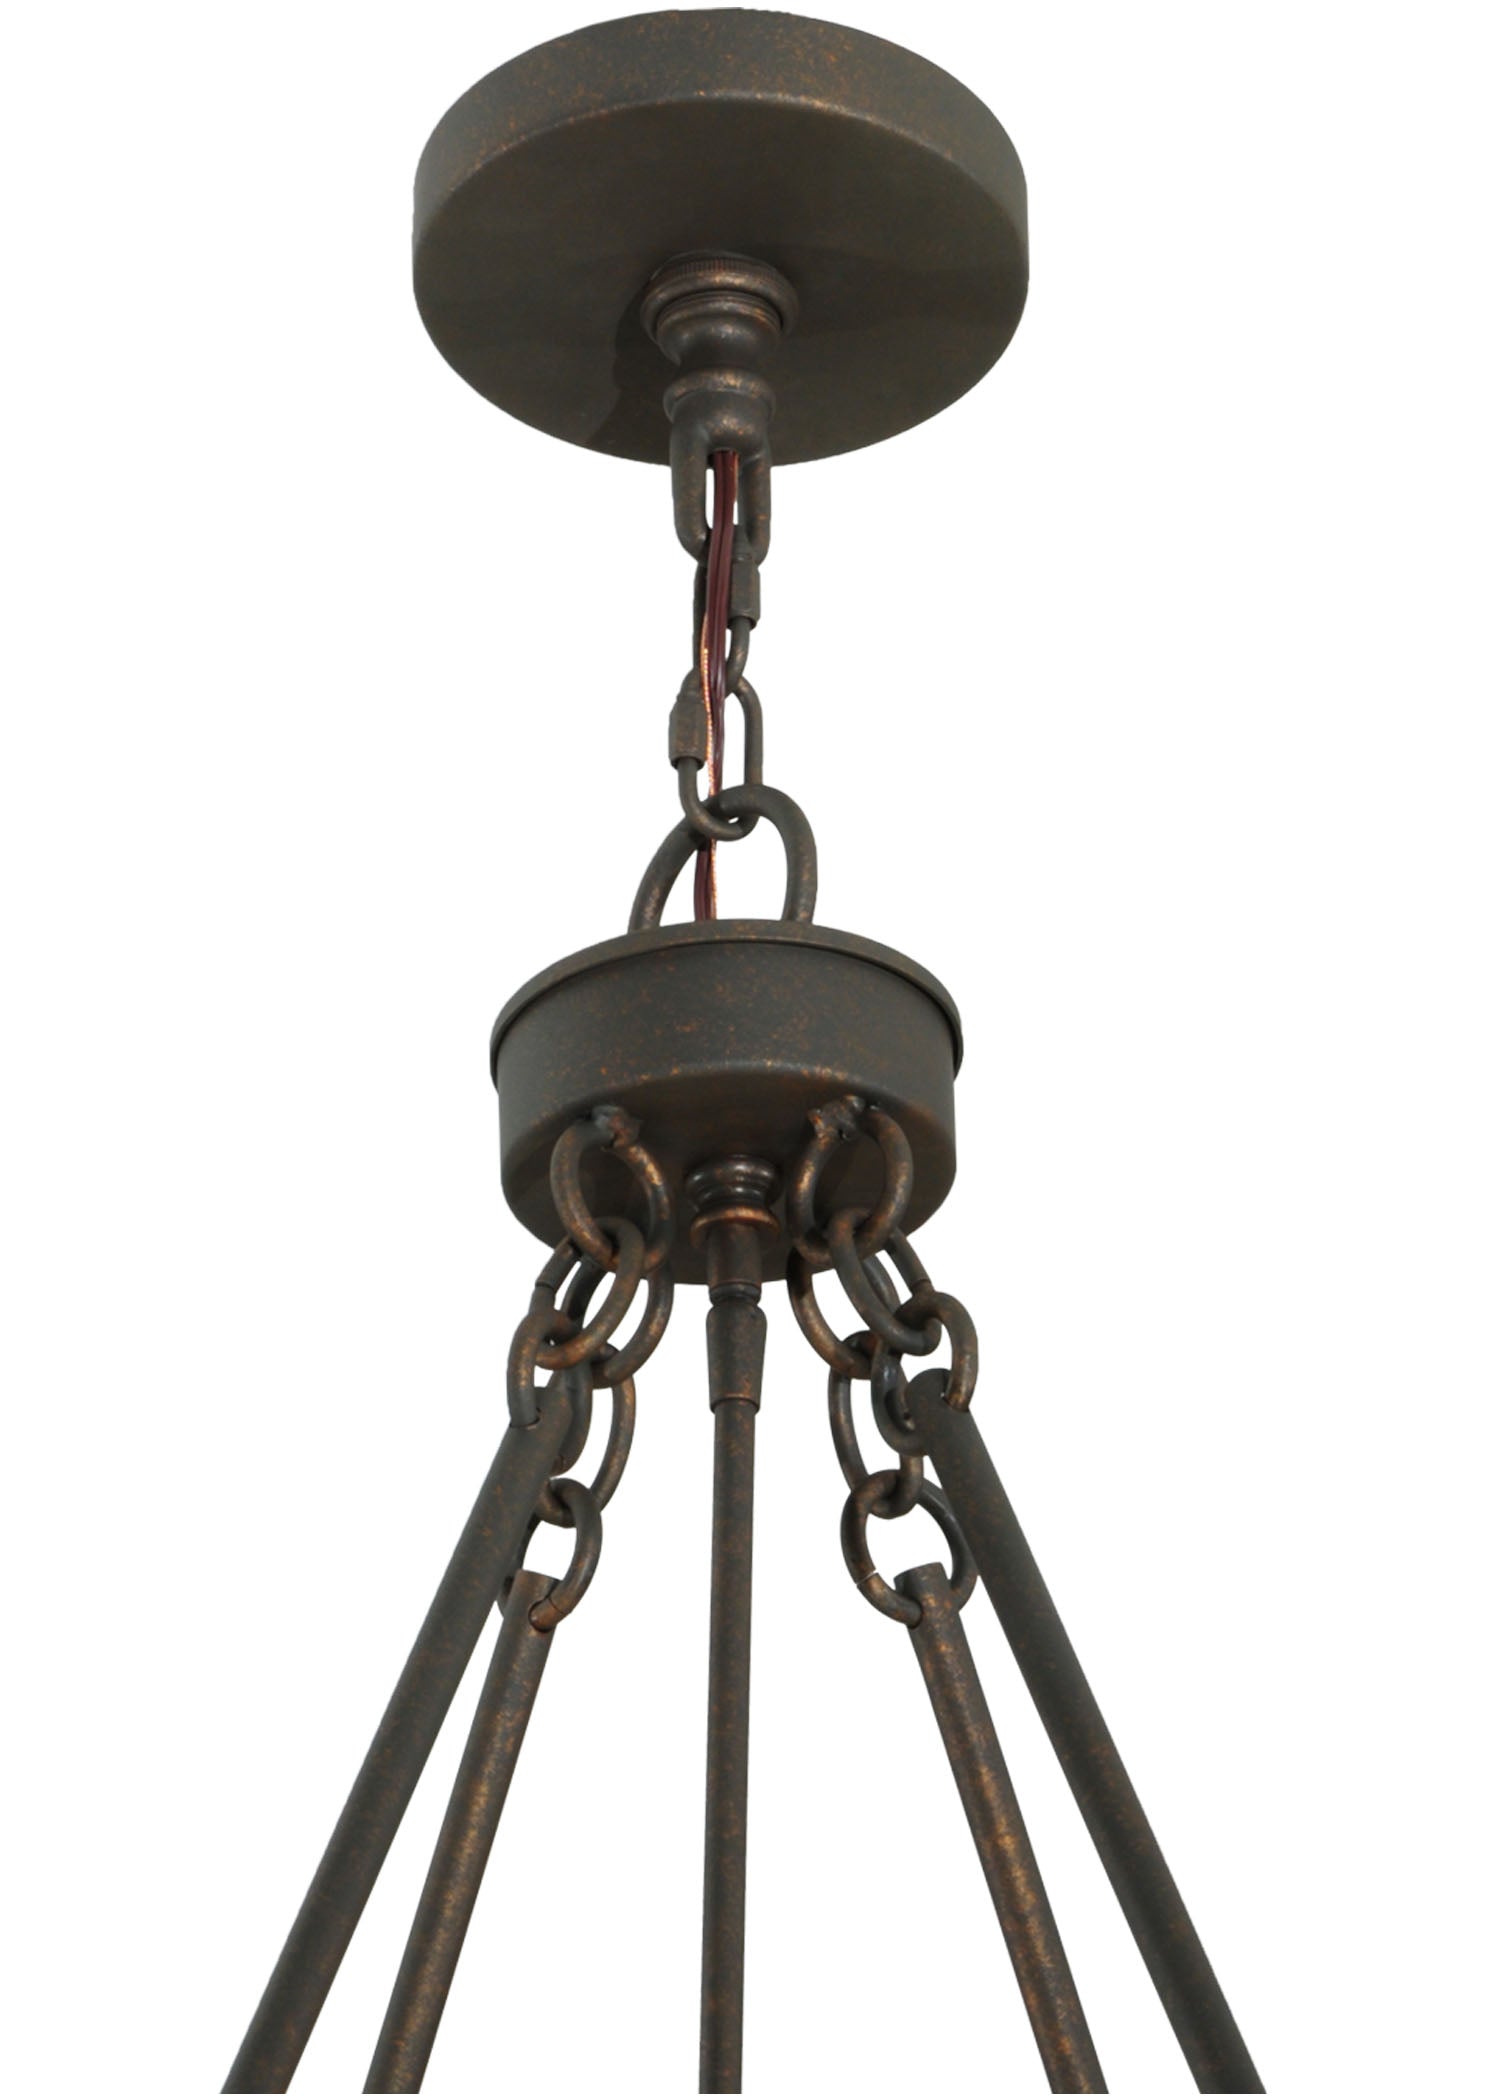 36" Covina Inverted Pendant by 2nd Ave Lighting